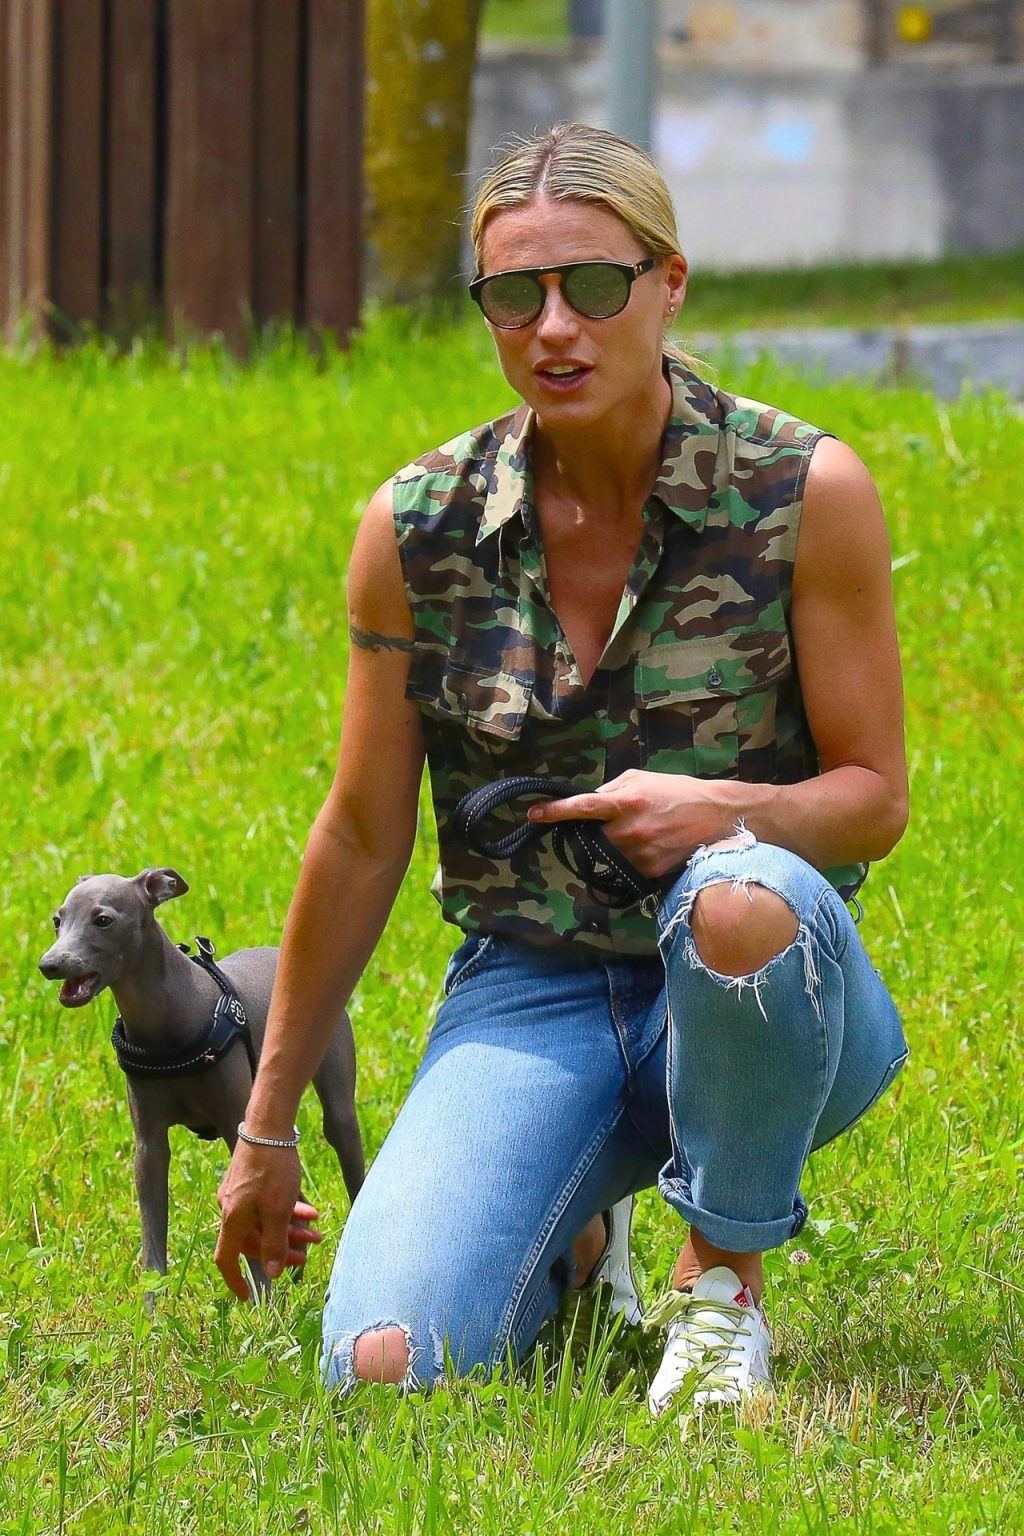 Sexy Michelle Hunziker Plays with Her Dogs in The Park (16 Photos)